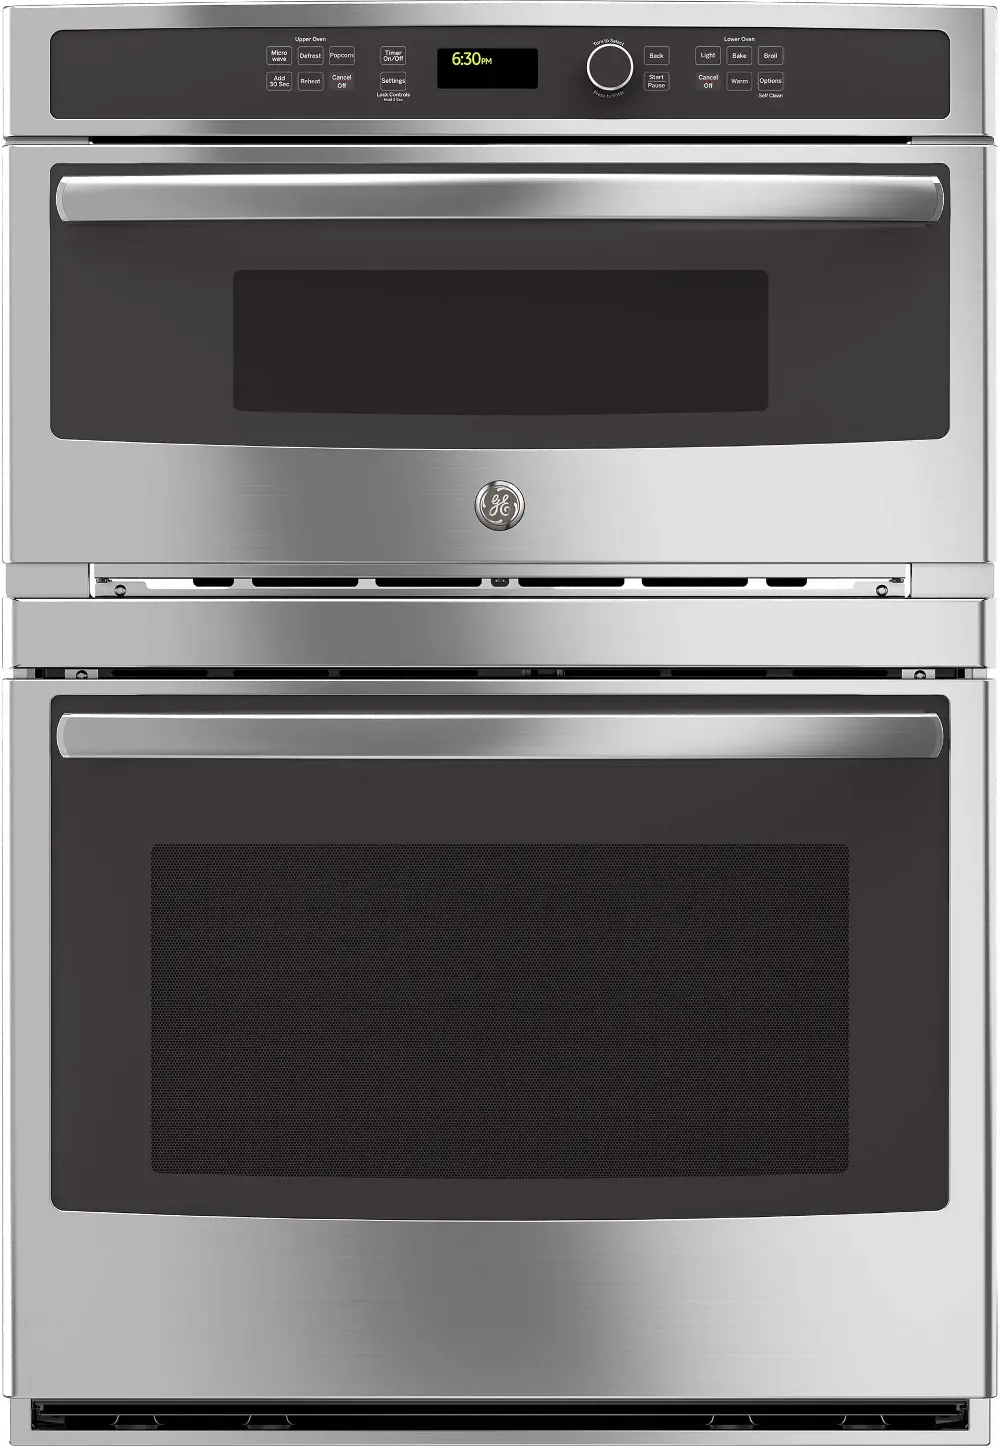 JT3800SHSS GE 6.7 cu ft Combination Wall Oven - Stainless Steel 30 Inch-1